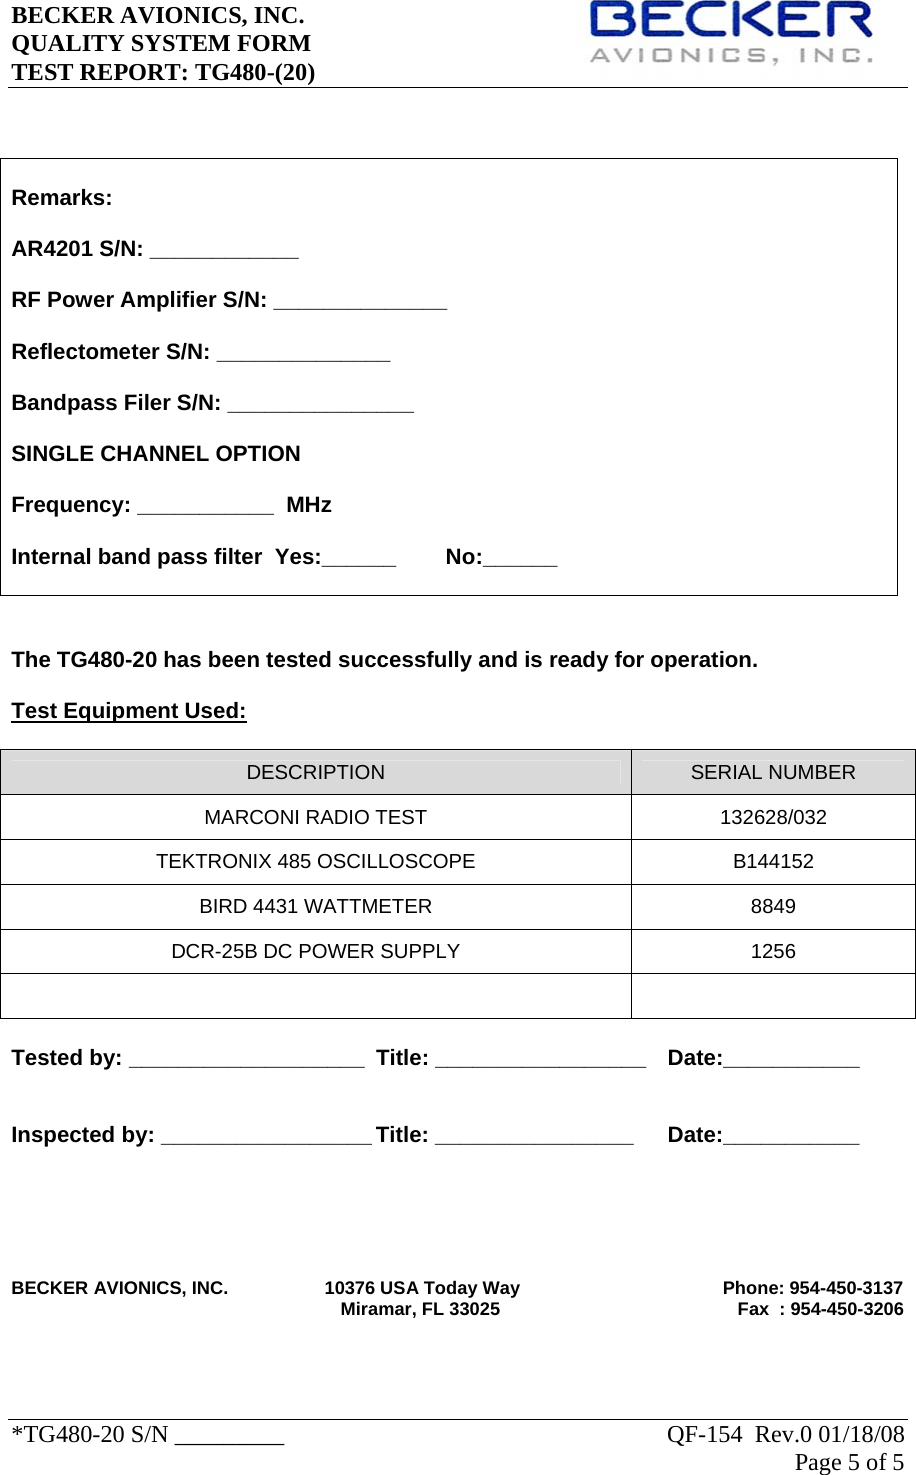 BECKER AVIONICS, INC.     QUALITY SYSTEM FORM TEST REPORT: TG480-(20)   *TG480-20 S/N _________                                                               QF-154  Rev.0 01/18/08 Page 5 of 5       The TG480-20 has been tested successfully and is ready for operation.  Test Equipment Used:  DESCRIPTION  SERIAL NUMBER MARCONI RADIO TEST  132628/032 TEKTRONIX 485 OSCILLOSCOPE  B144152 BIRD 4431 WATTMETER  8849 DCR-25B DC POWER SUPPLY  1256    Tested by: ___________________  Title: _________________  Date:___________   Inspected by: _________________ Title: ________________   Date:___________       BECKER AVIONICS, INC.                   10376 USA Today Way                                        Phone: 954-450-3137                                                                  Miramar, FL 33025                                               Fax  : 954-450-3206   Remarks:  AR4201 S/N: ____________  RF Power Amplifier S/N: ______________  Reflectometer S/N: ______________  Bandpass Filer S/N: _______________  SINGLE CHANNEL OPTION   Frequency: ___________  MHz    Internal band pass filter  Yes:______        No:______  